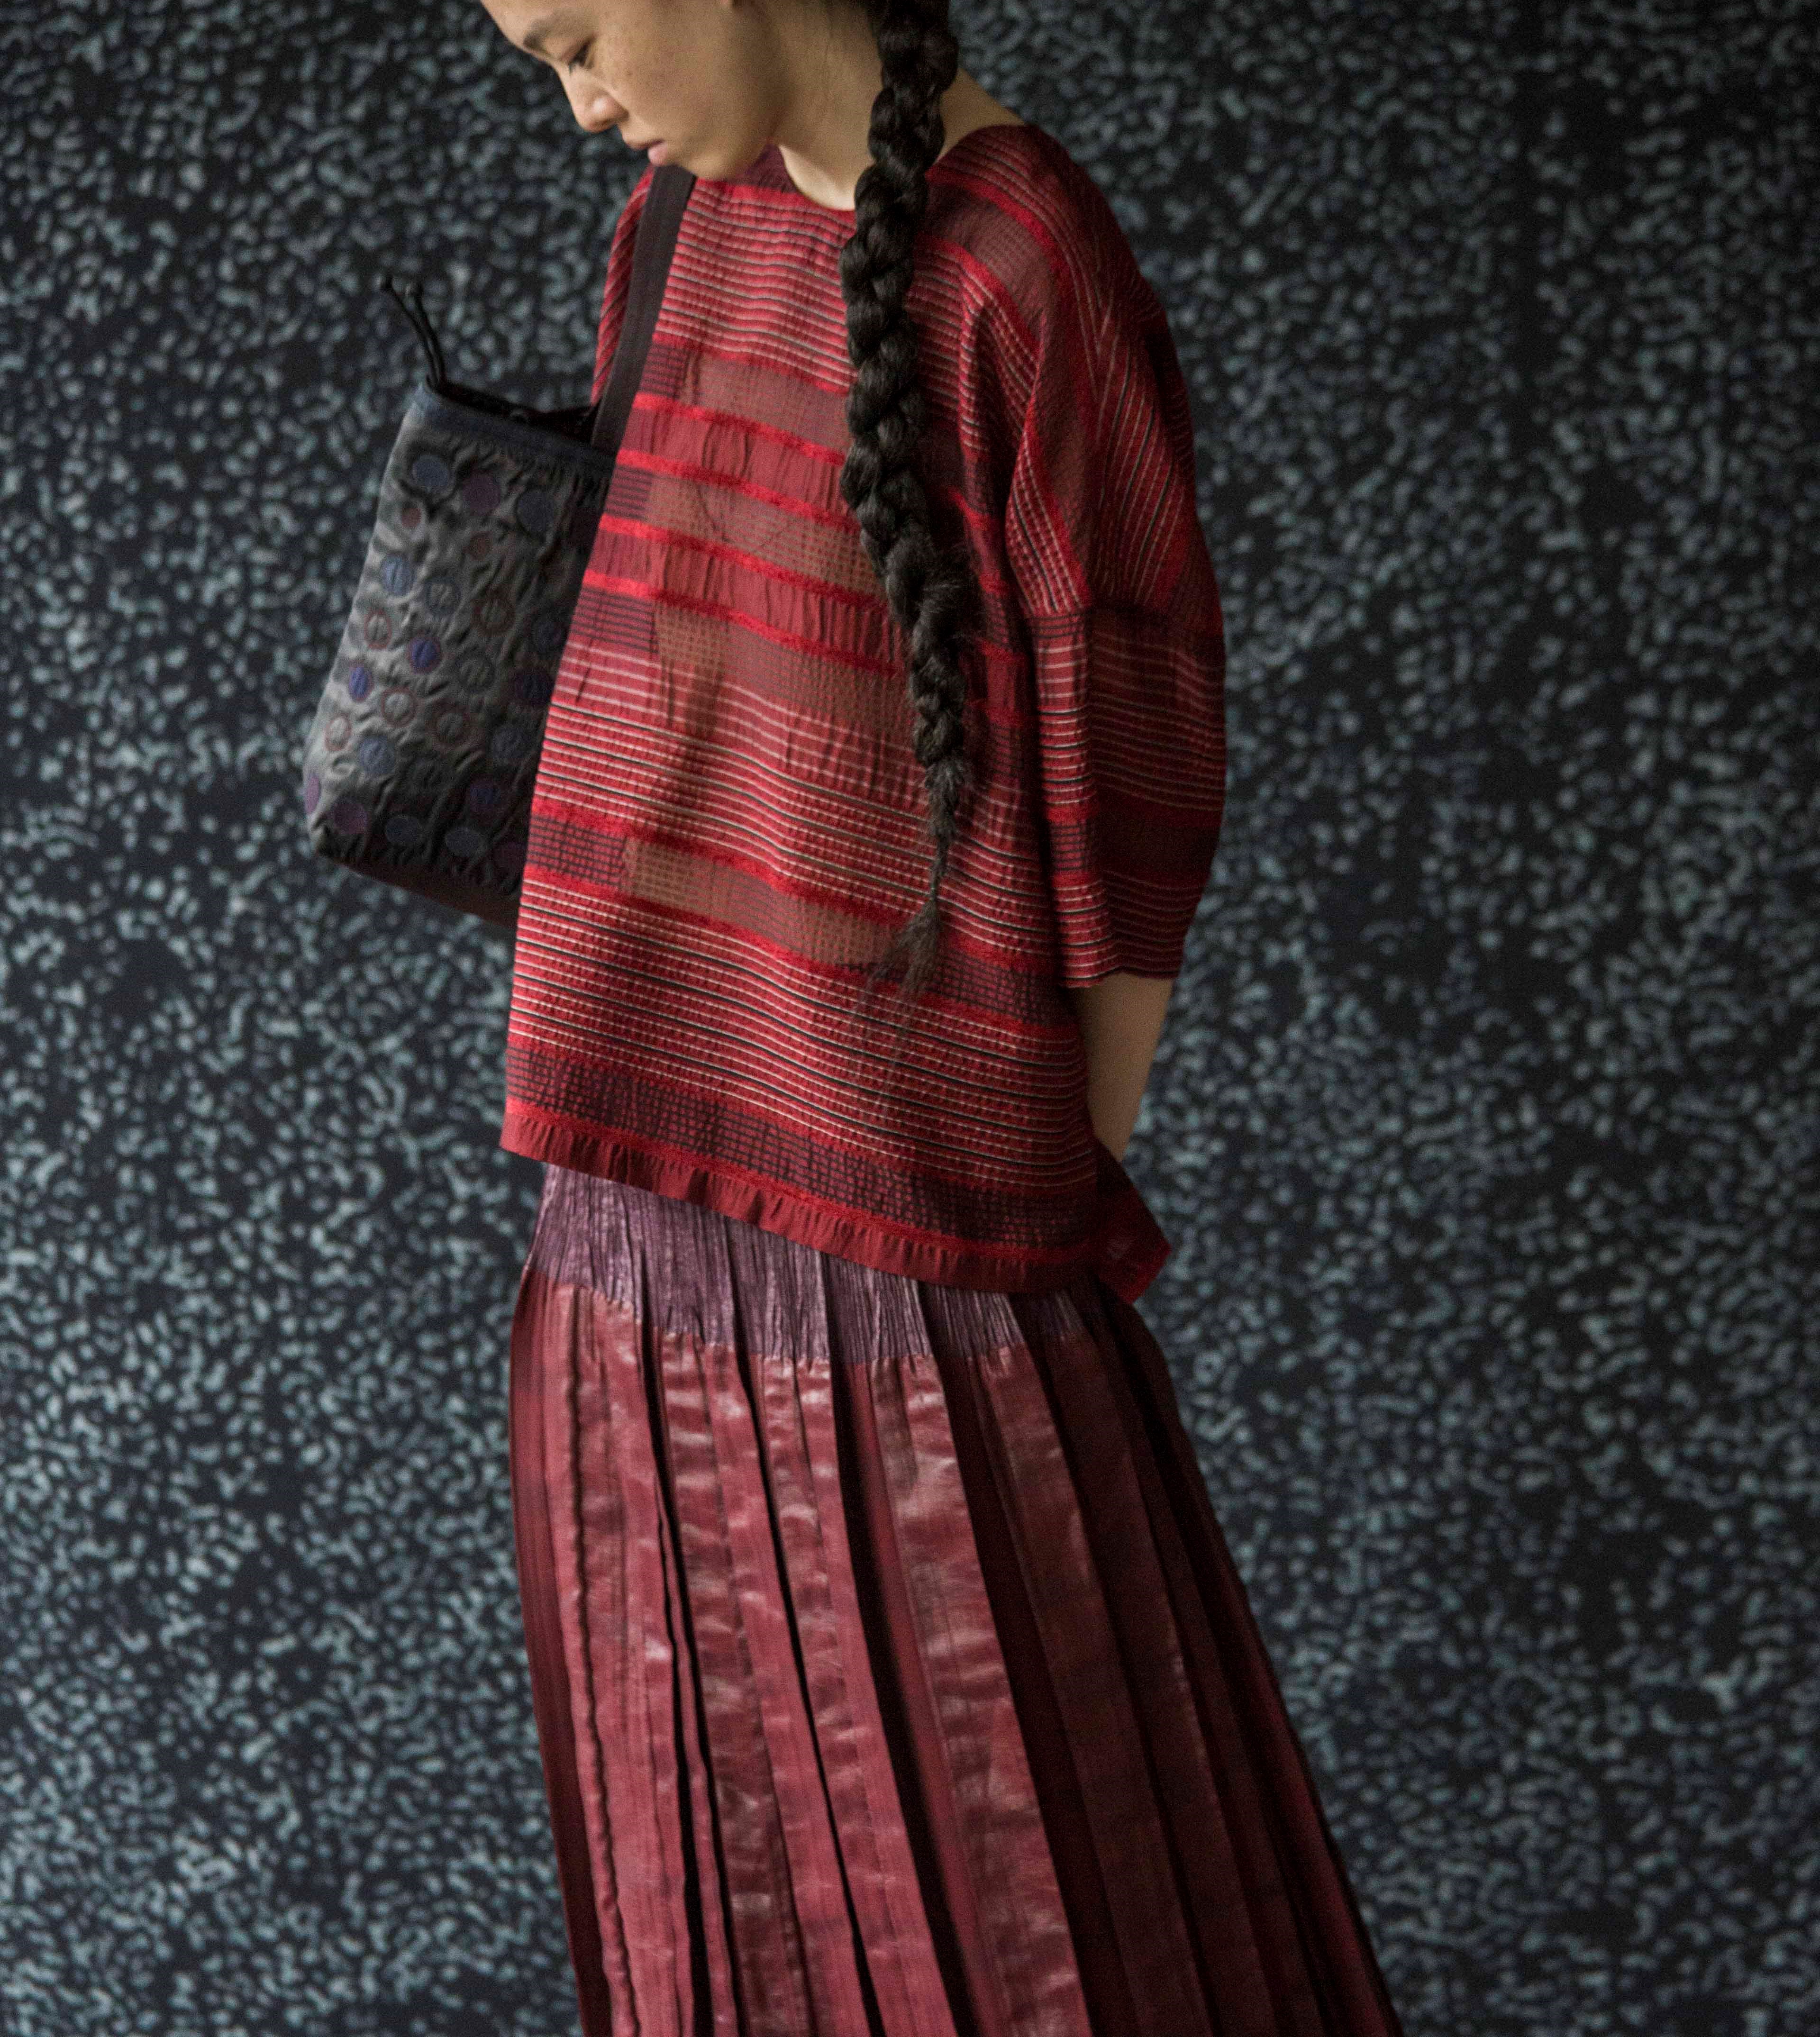 Issey Miyake's HaaT collection – Indian designs